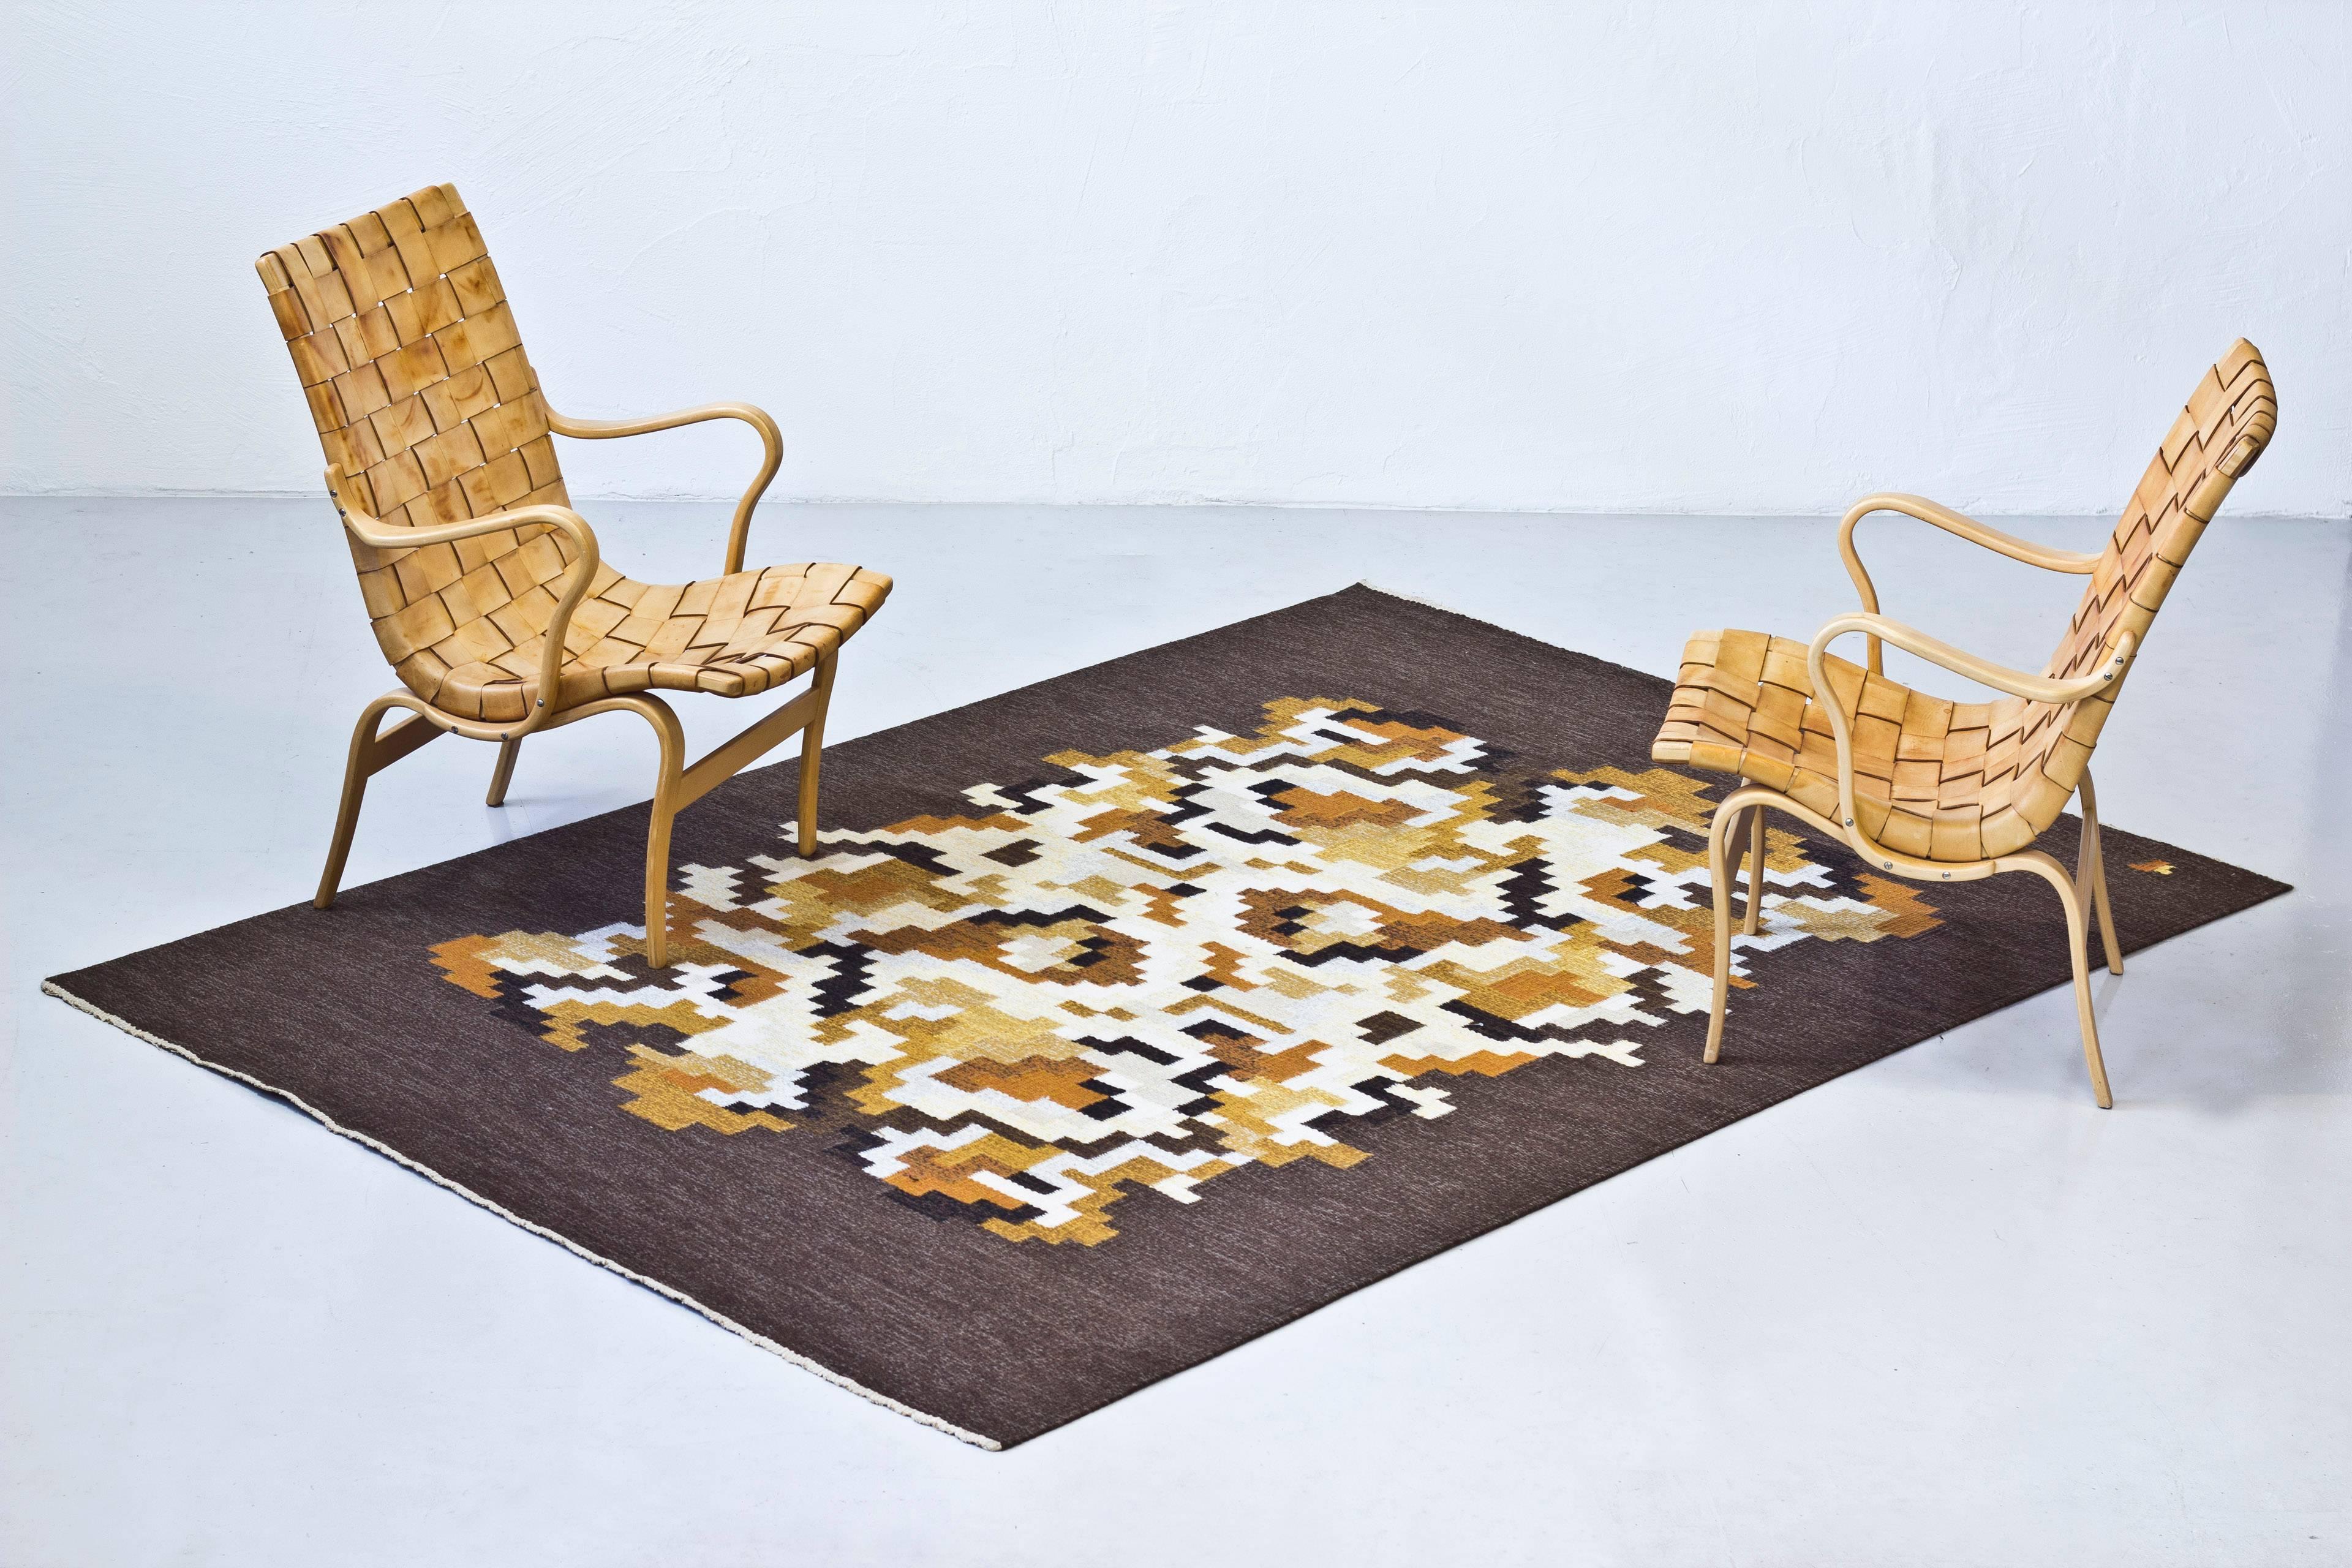 Flat-weave rug model Korall designed by Erik Lundberg. Hand made at Vavaregarden, Sweden during the 1960s. Asymmetrical pattern weaved in wool shifting in brown, yellow, orange, white and black tones. Signed with the Lundberg monogram. Very good